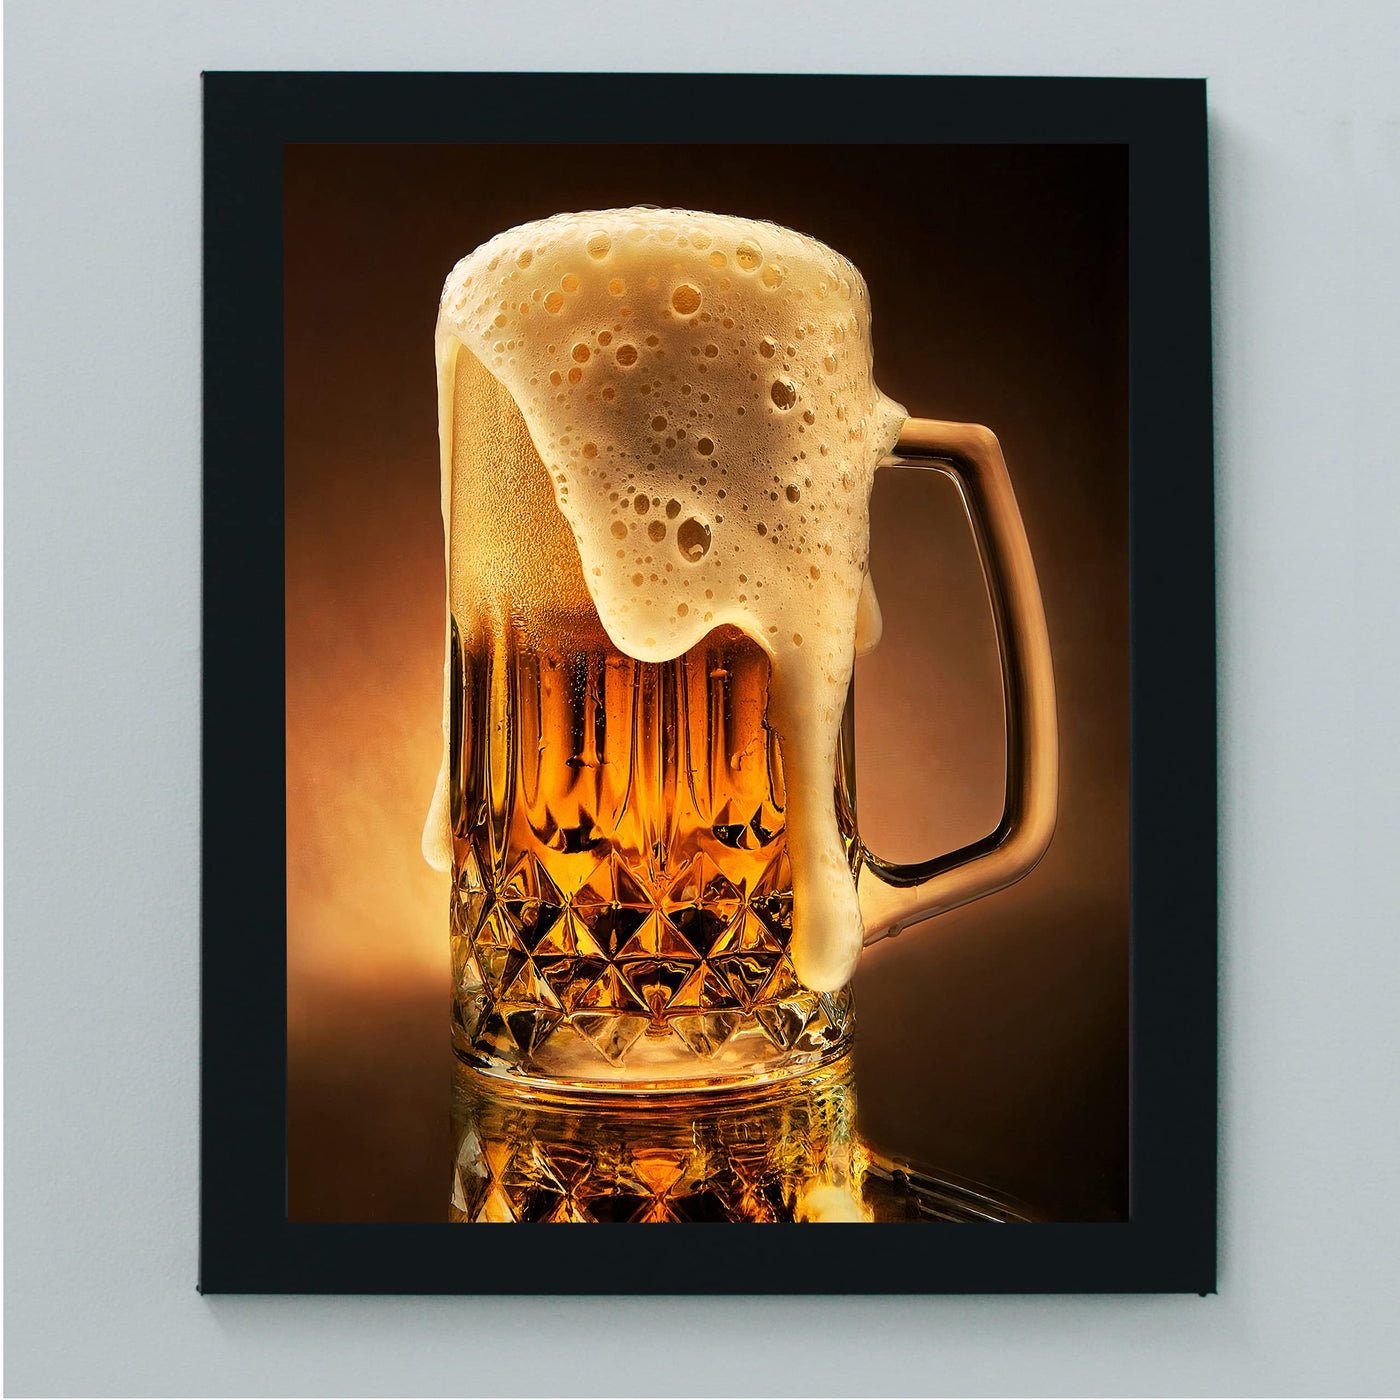 Ice Cold Beer In Stein Fun Bar Sign Decor -8 x 10"-Retro Beer Drinking Picture Print-Ready to Frame. Perfect Decoration for Home-Man Cave-Pub-Dorm-Restaurants. Great Gift for All Alcohol Drinkers!